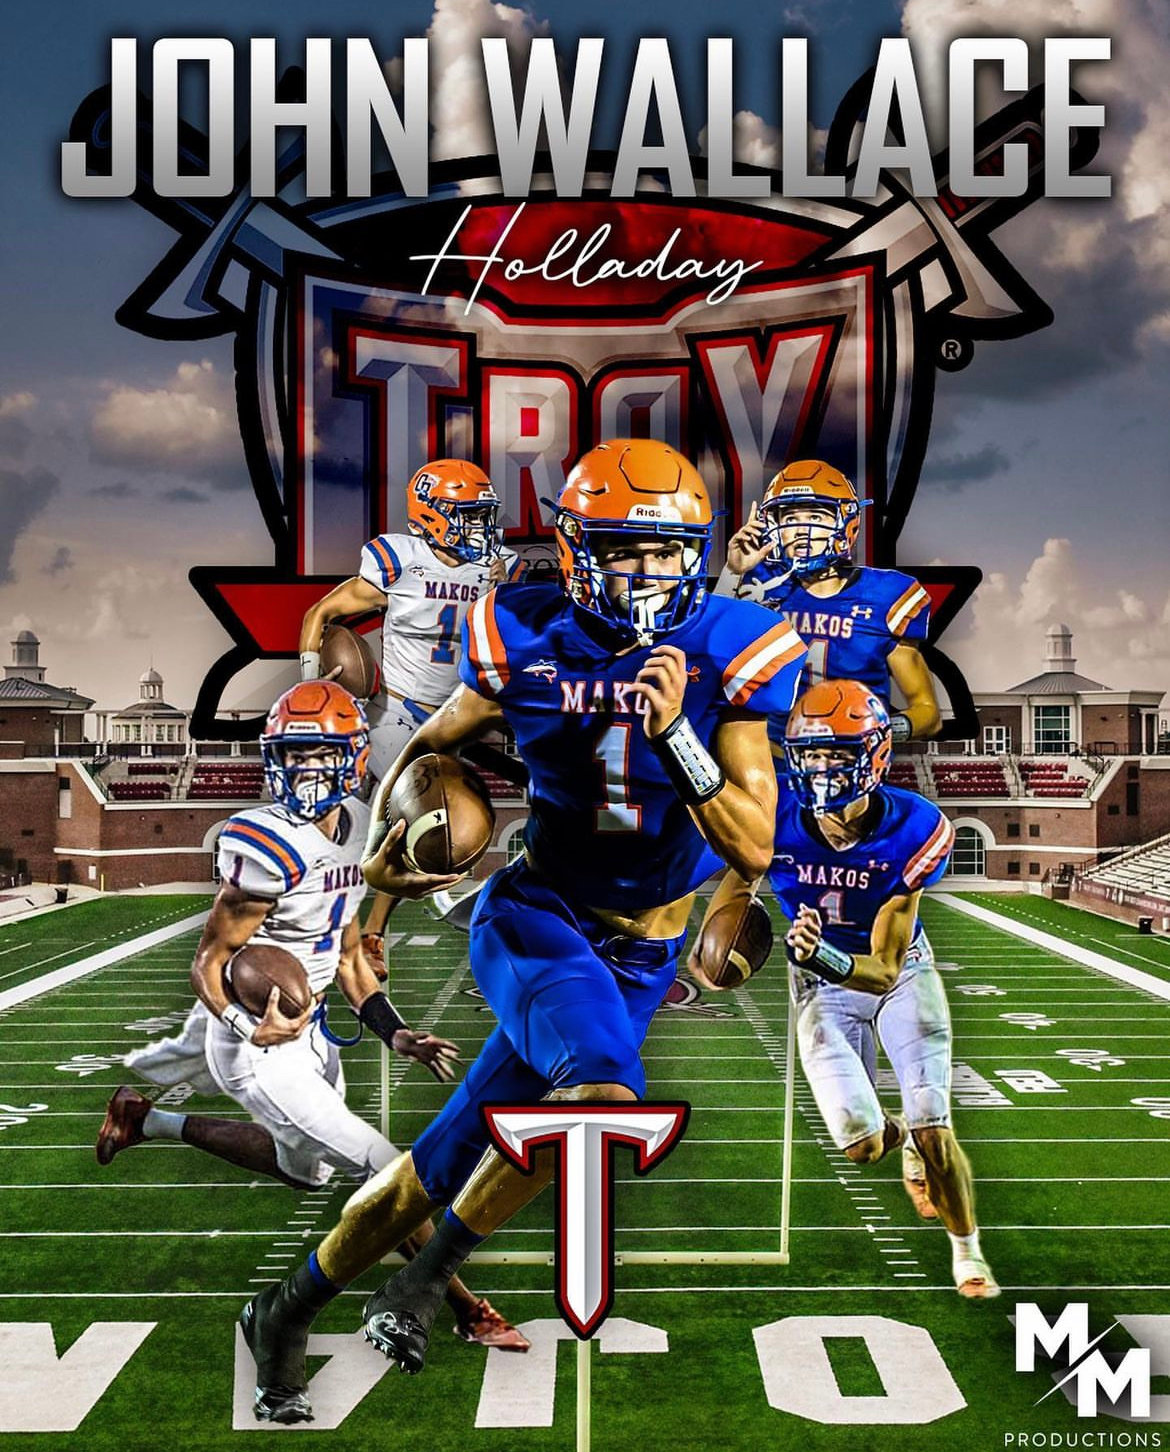 Orange Beach senior John Wallace Holladay is headed to the Troy Trojans after graduation he announced Monday, April 3. Holladay marks a third member from the Makos’ 2022 roster to land with Division I programs joining Chris Pearson and Cash Turner.